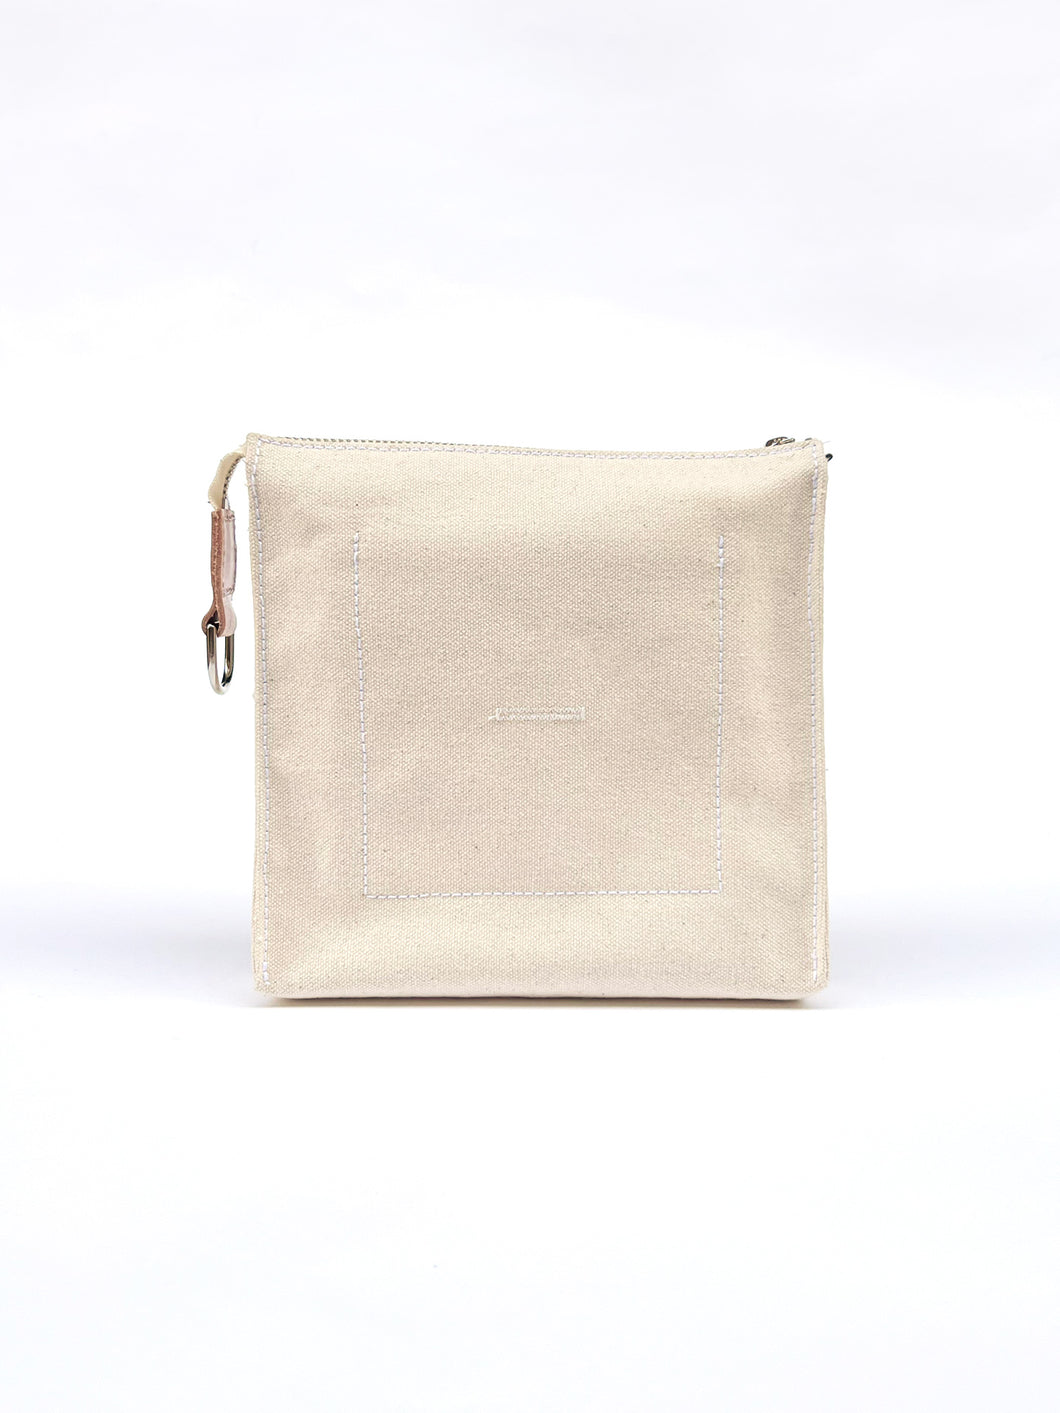 THE CONVERTIBLE CANVAS CLUTCH in natural